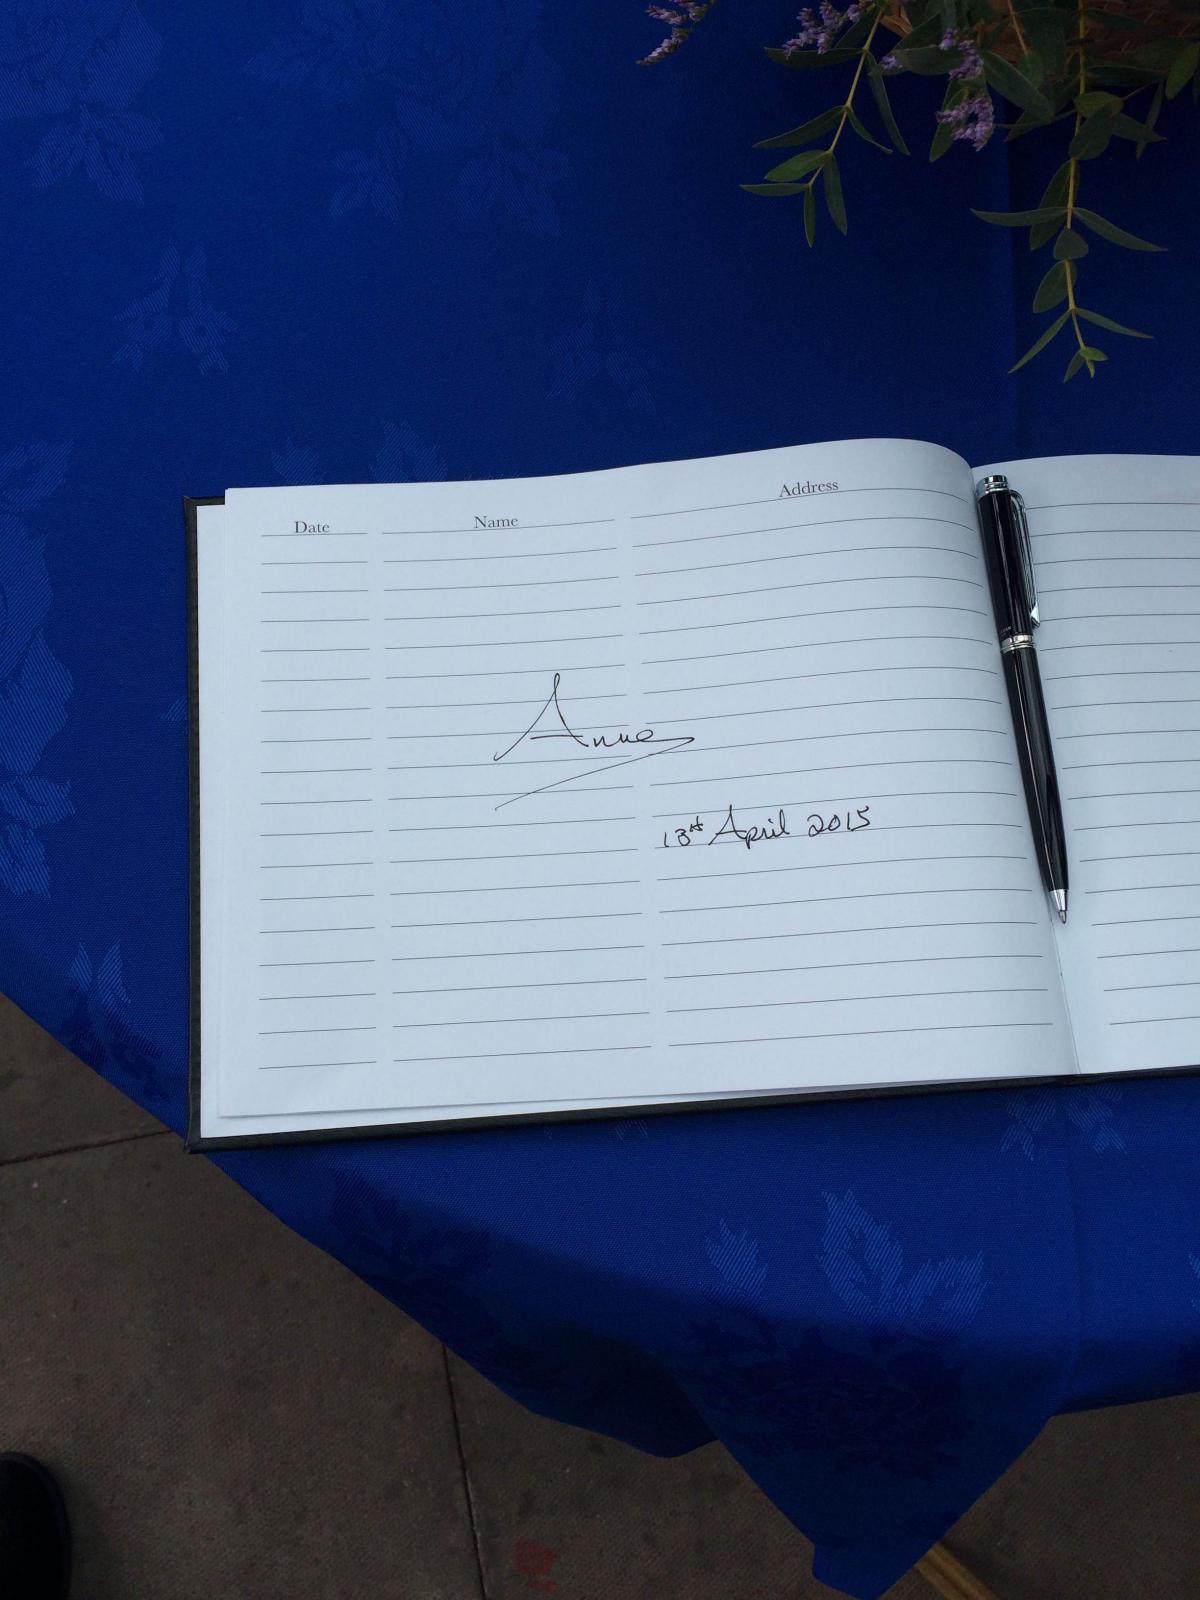 The Princess Royal signed Severn Valley's visitor book